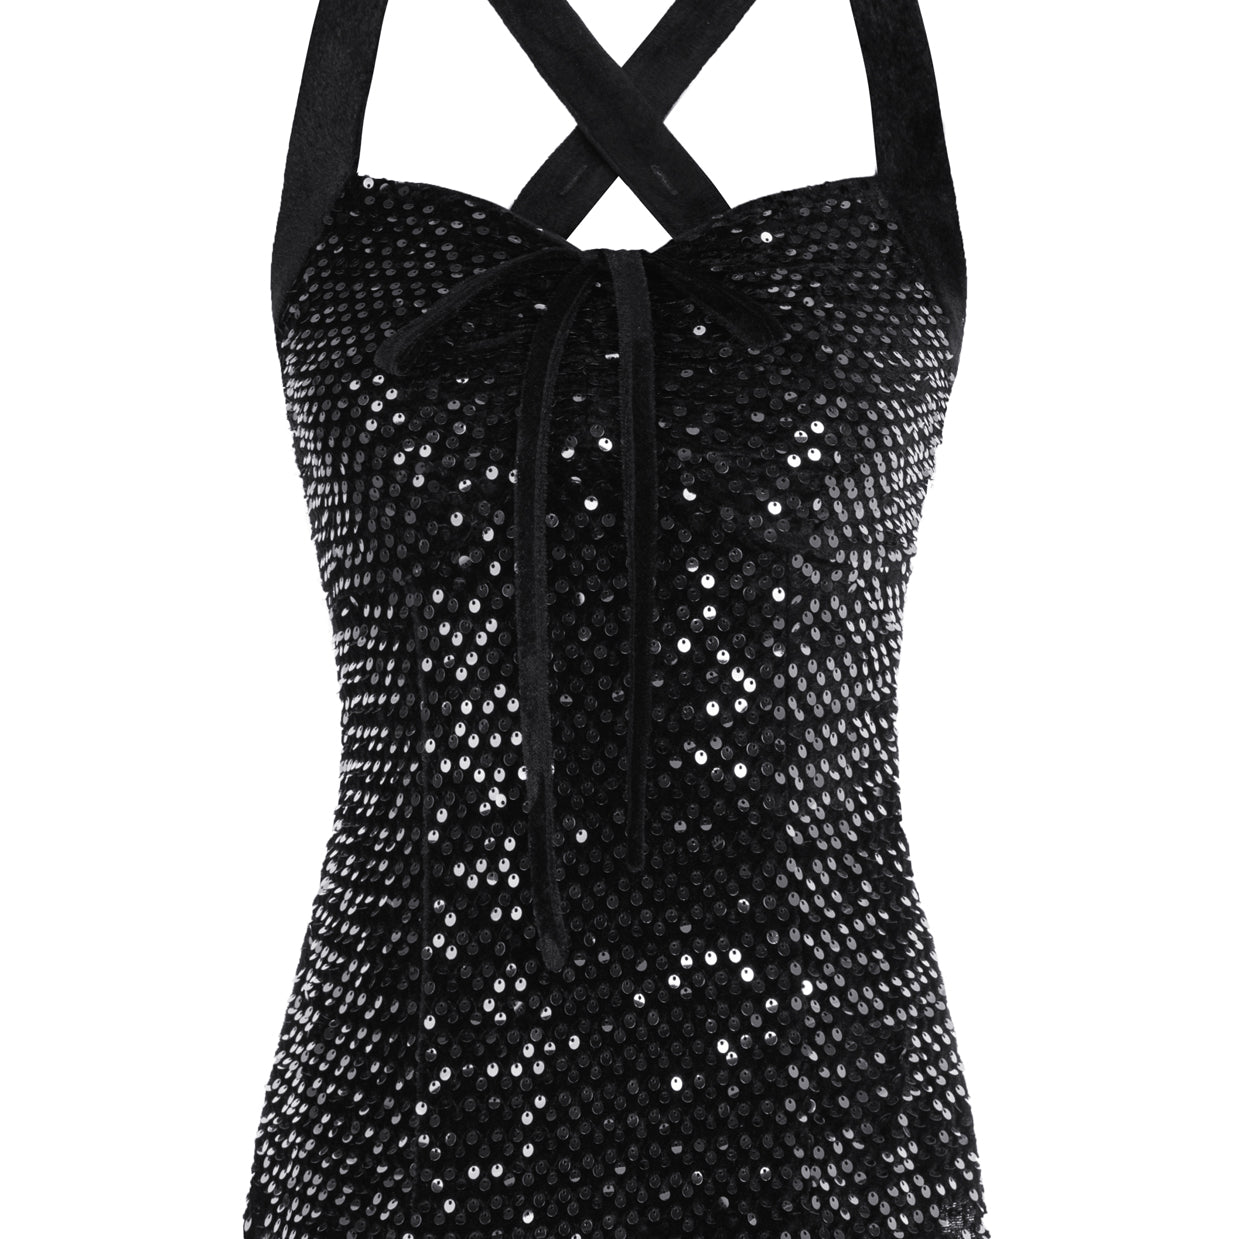 Seckill Offer⌛Sparkly Sequin Tops for Women Velvet Strappy Camis Tank Tops Night Party